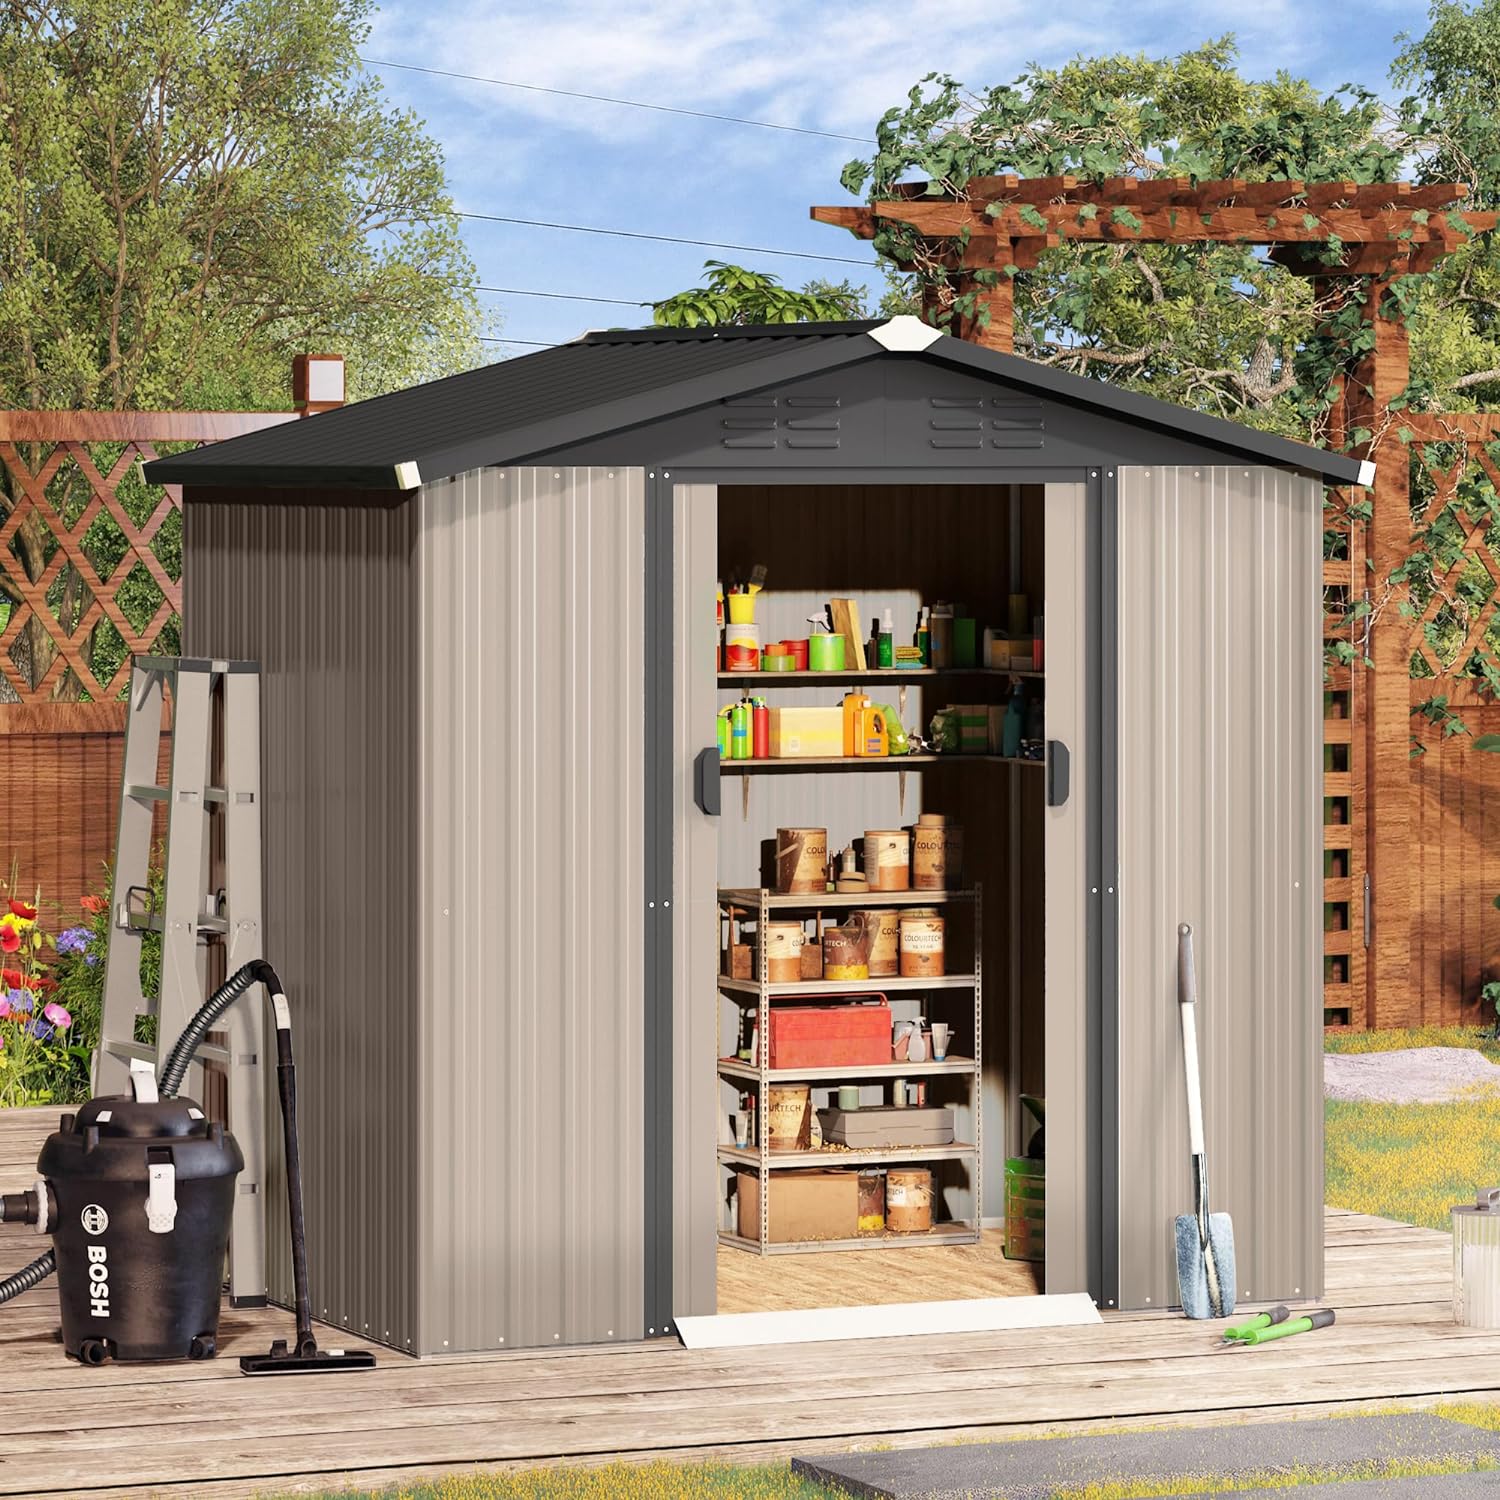 AECOJOY 6 x 4 Ft Shed, Small Outdoor Storage Tool Shed (Sliding Door), Metal Garden Shed for Yard, Outdoor Storage Clearance in Grey